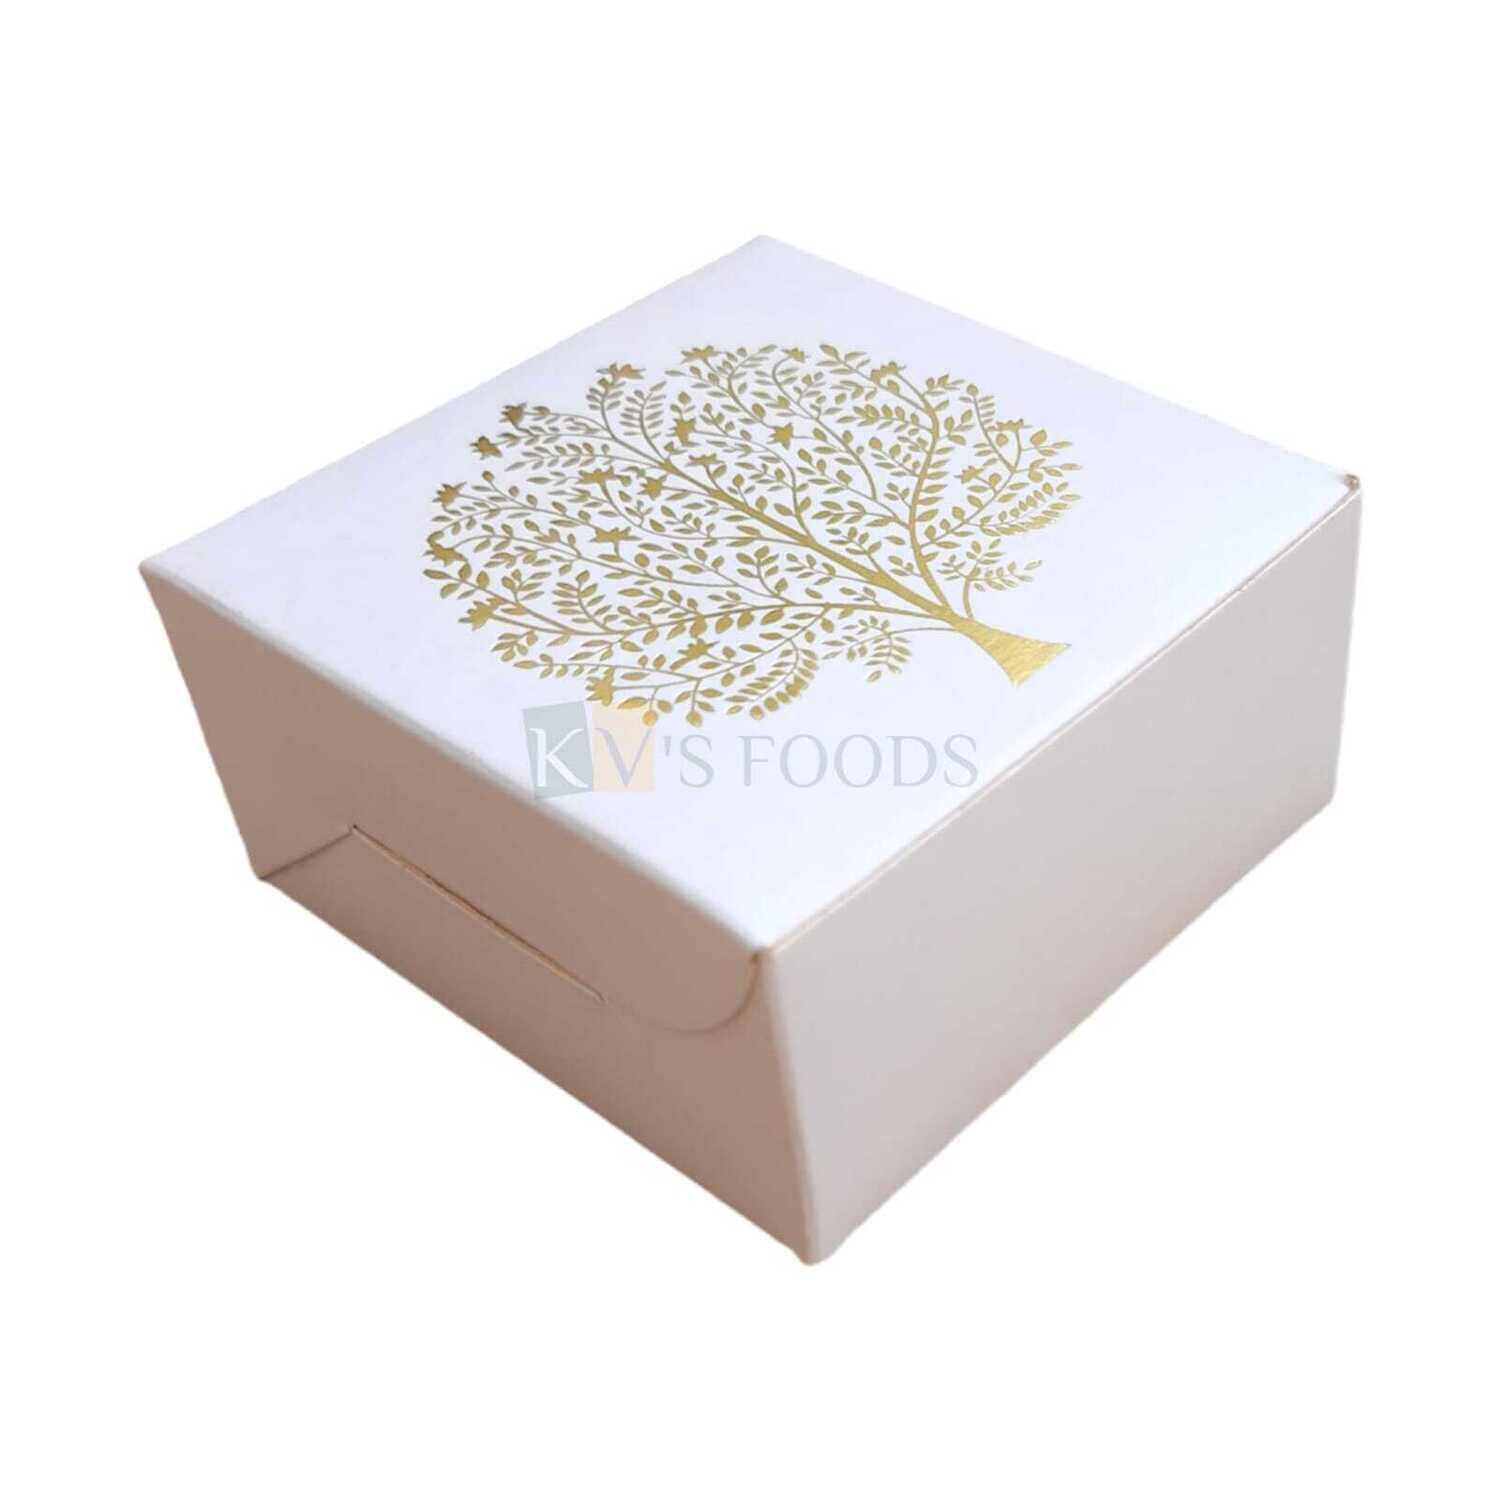 5PC Set of White With Golden Tree Design Chocolate Box Folding Box Size 3*3*1.5 Inch for Chocolates, Two Cookies, One small Size Donut Truffles Box, Festive Gift Hamper Boxes